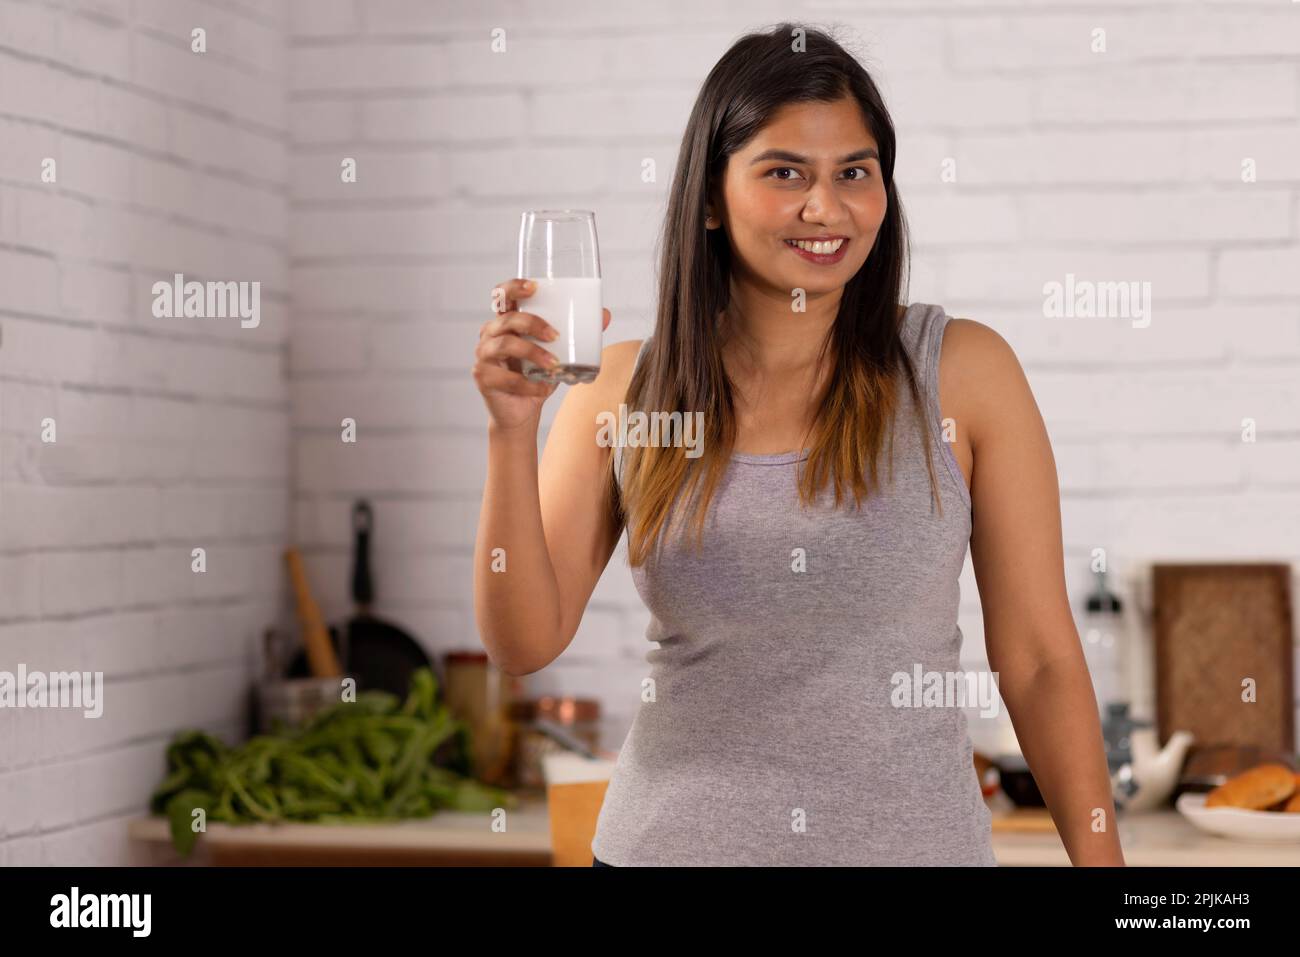 Cheerful woman holding a glass of milk in kitchen Stock Photo